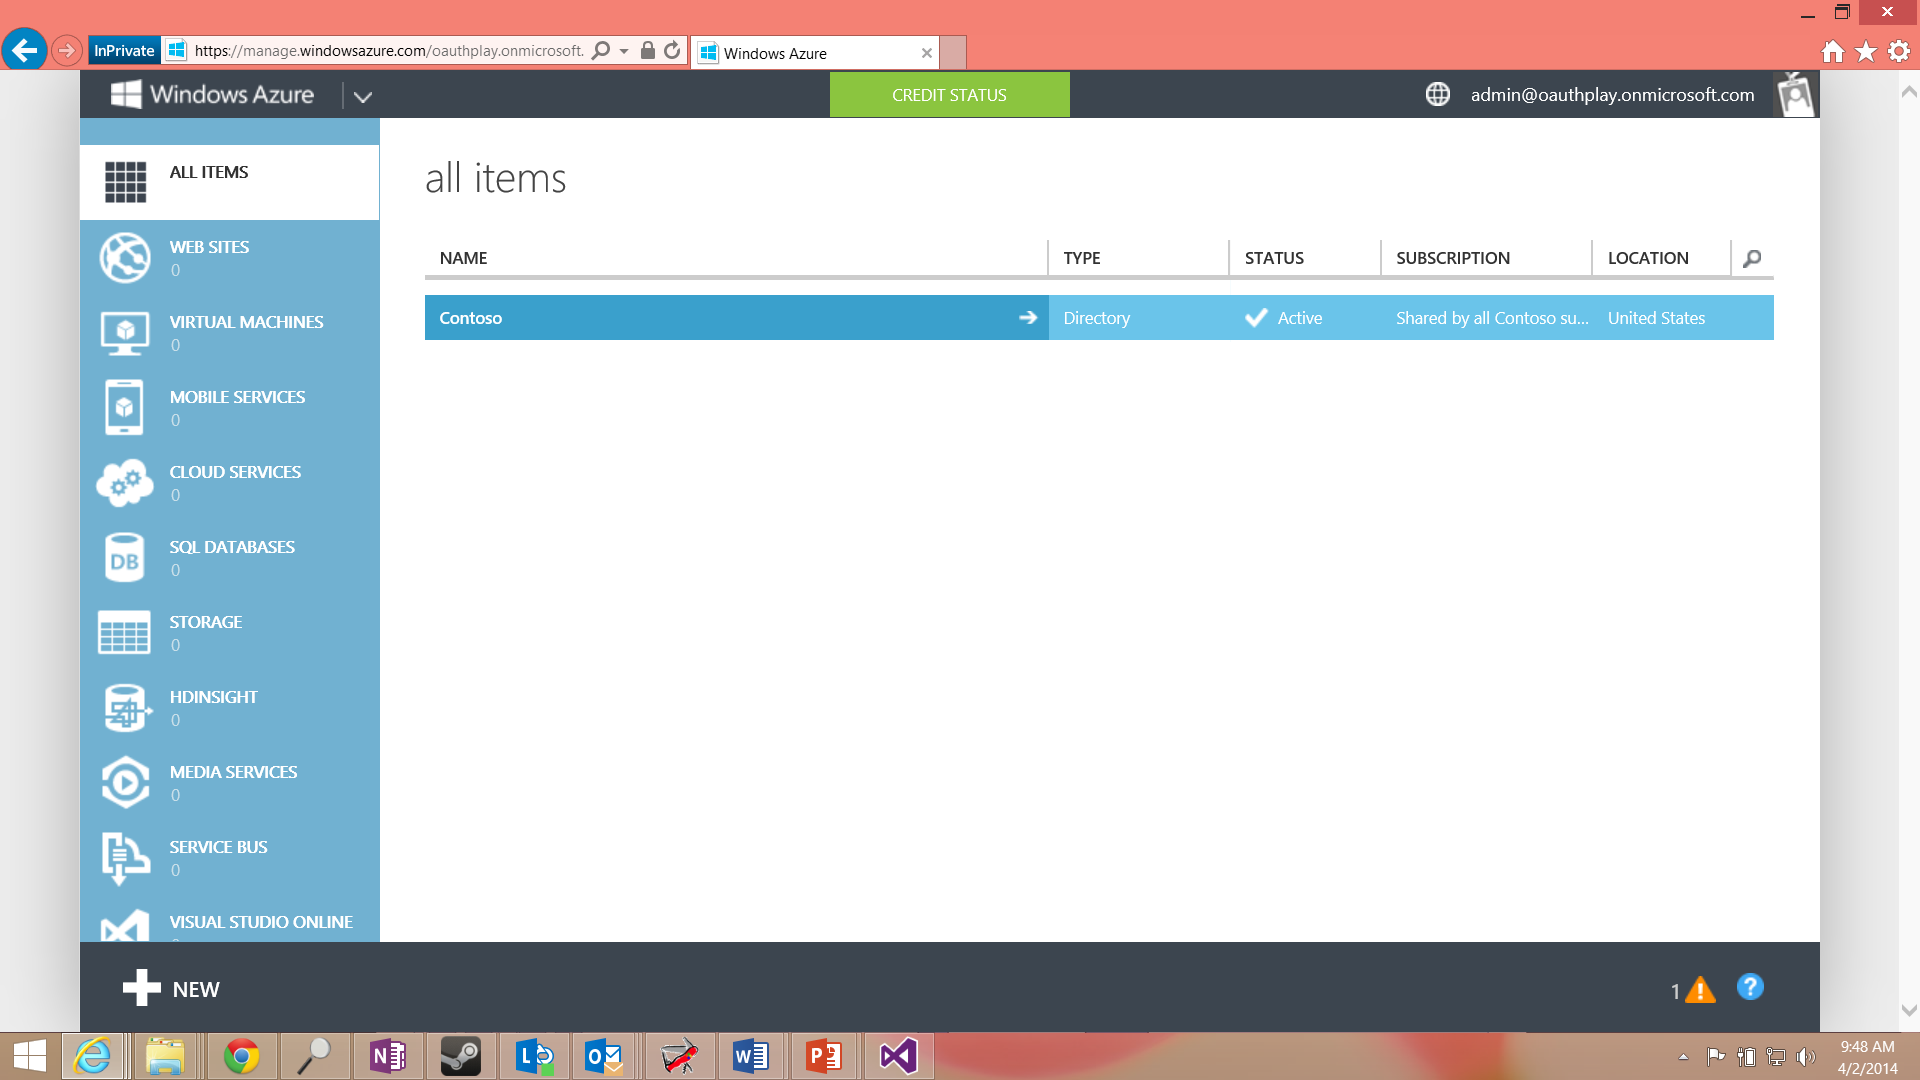 A screenshot of the "All Items" section in the Azure management portal.